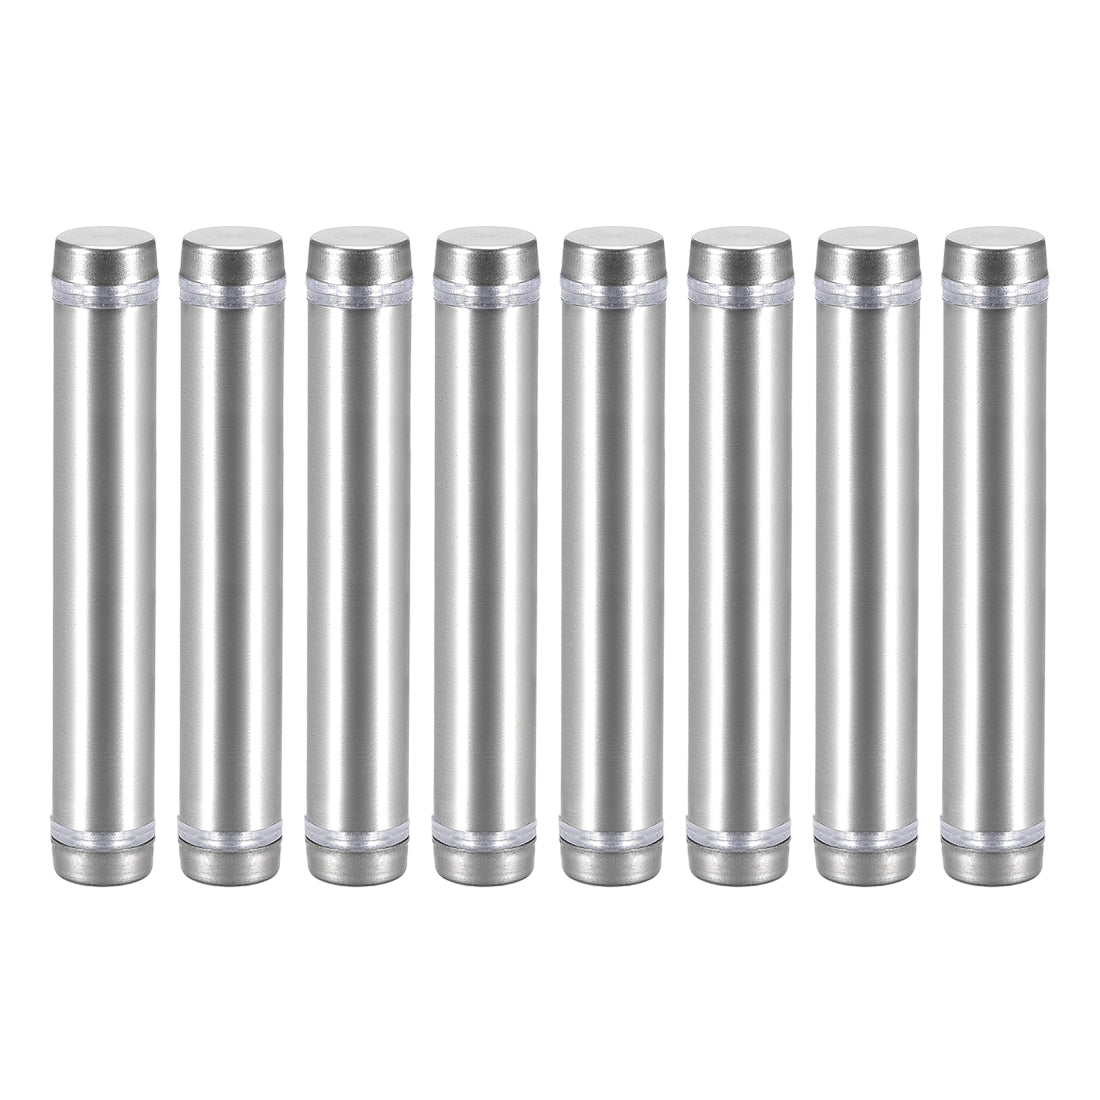 uxcell Uxcell Glass Standoff Double Head Stainless Steel Standoff Holder 12mm x 74mm 8 Pcs